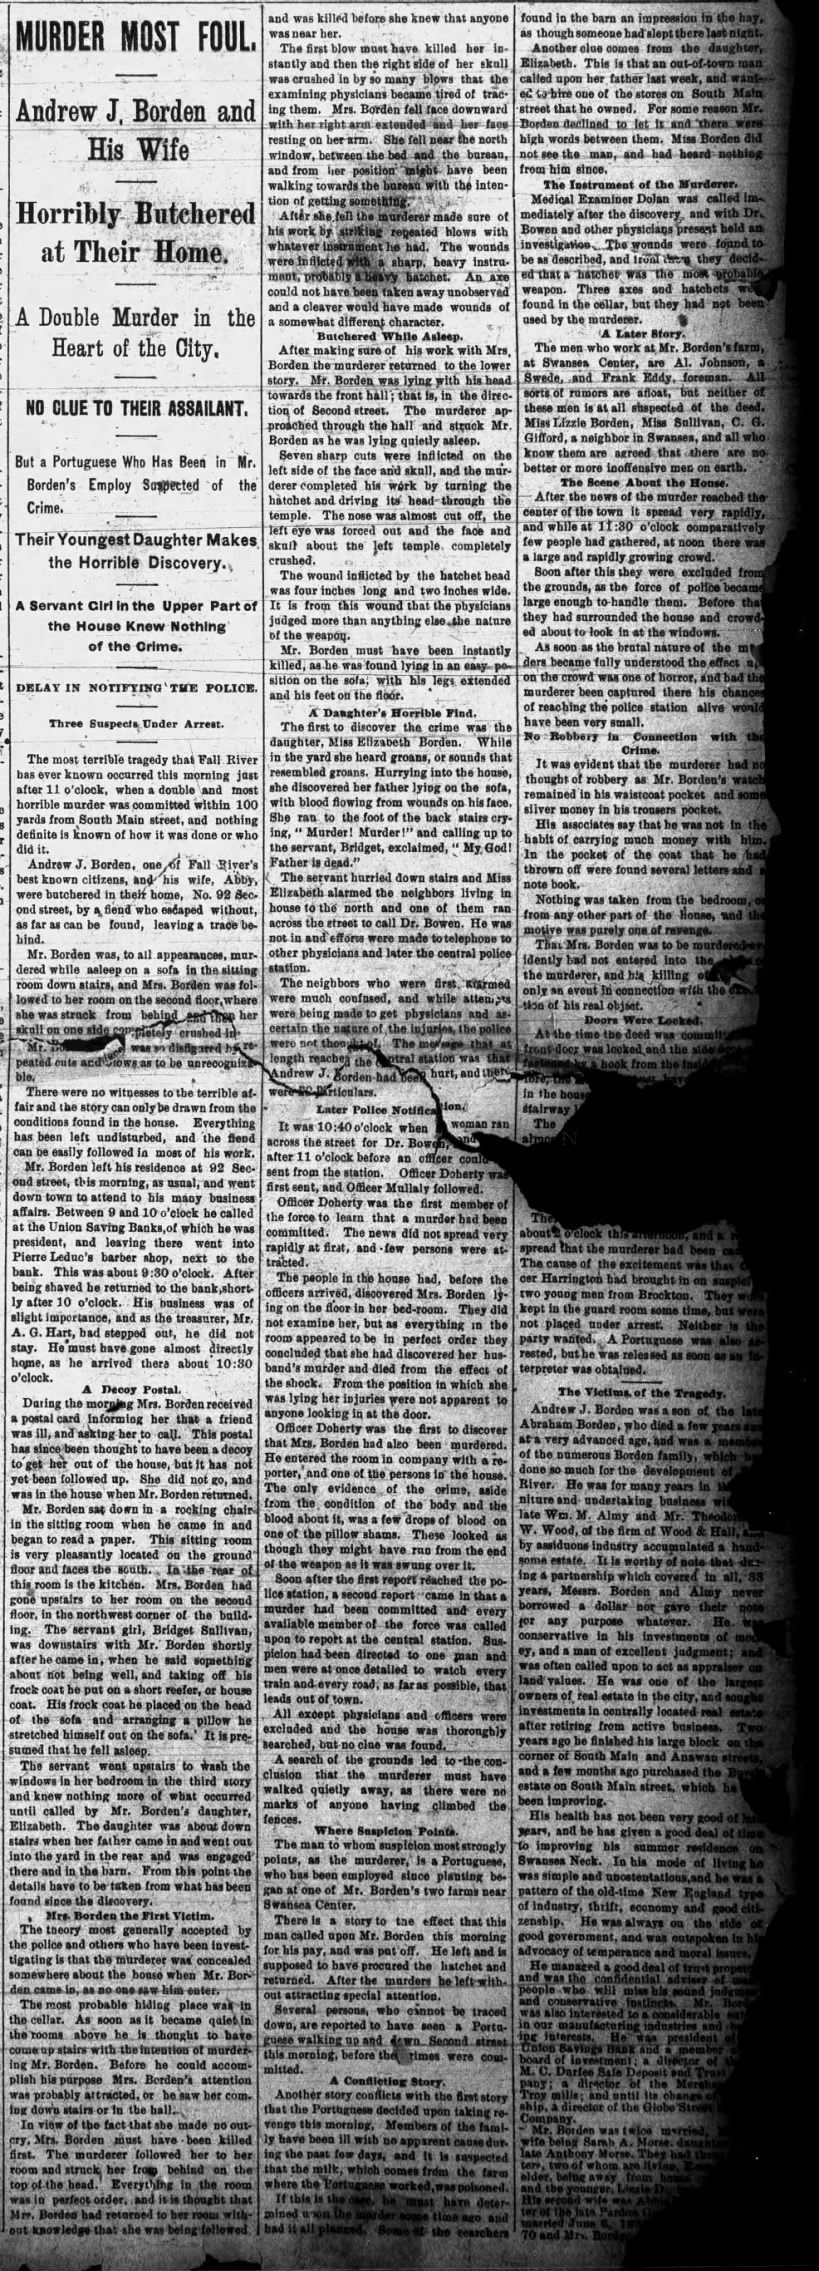 Same-day coverage of the murders of Andrew and Abby Borden from a Fall River newspaper